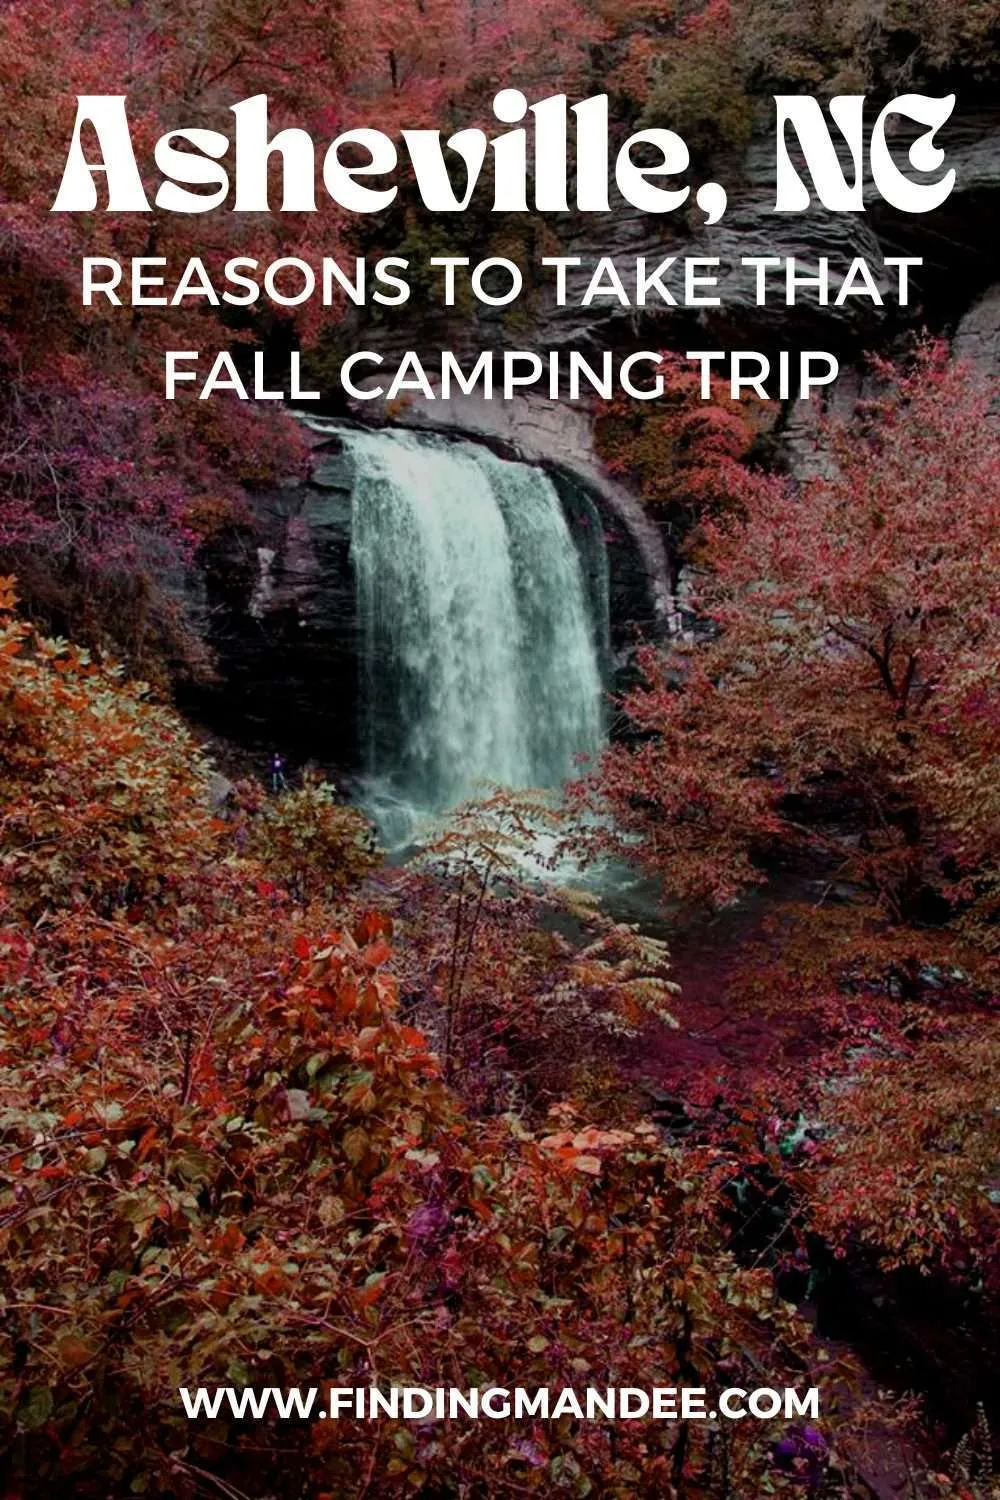 Asheville, NC: Reasons to Take that Fall Camping Trip | Finding Mandee